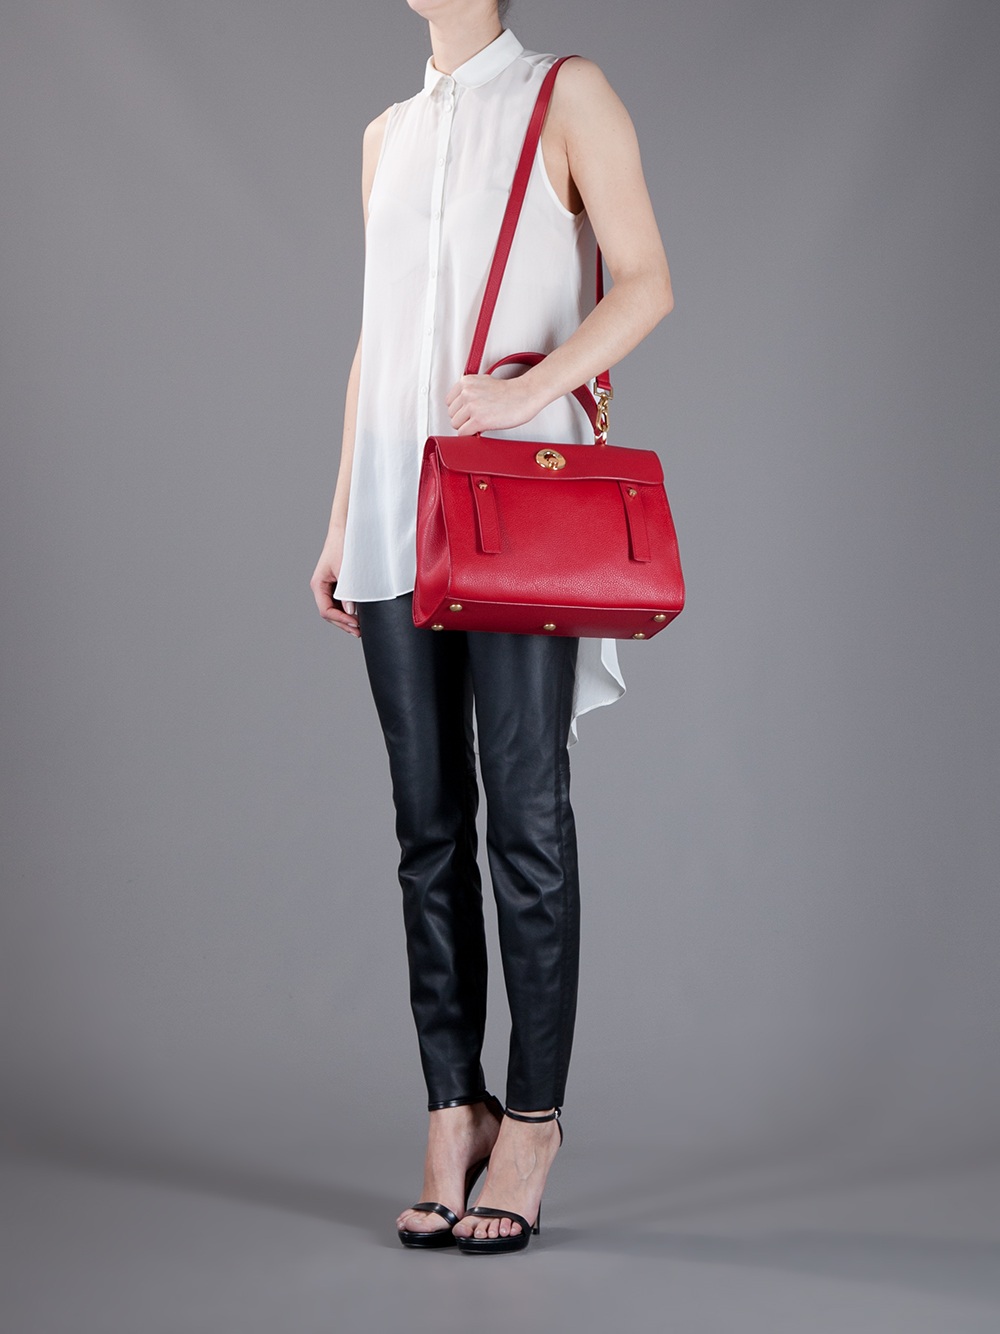 yves saint laurent purses sale - Saint laurent Muse Two Tote in Red | Lyst